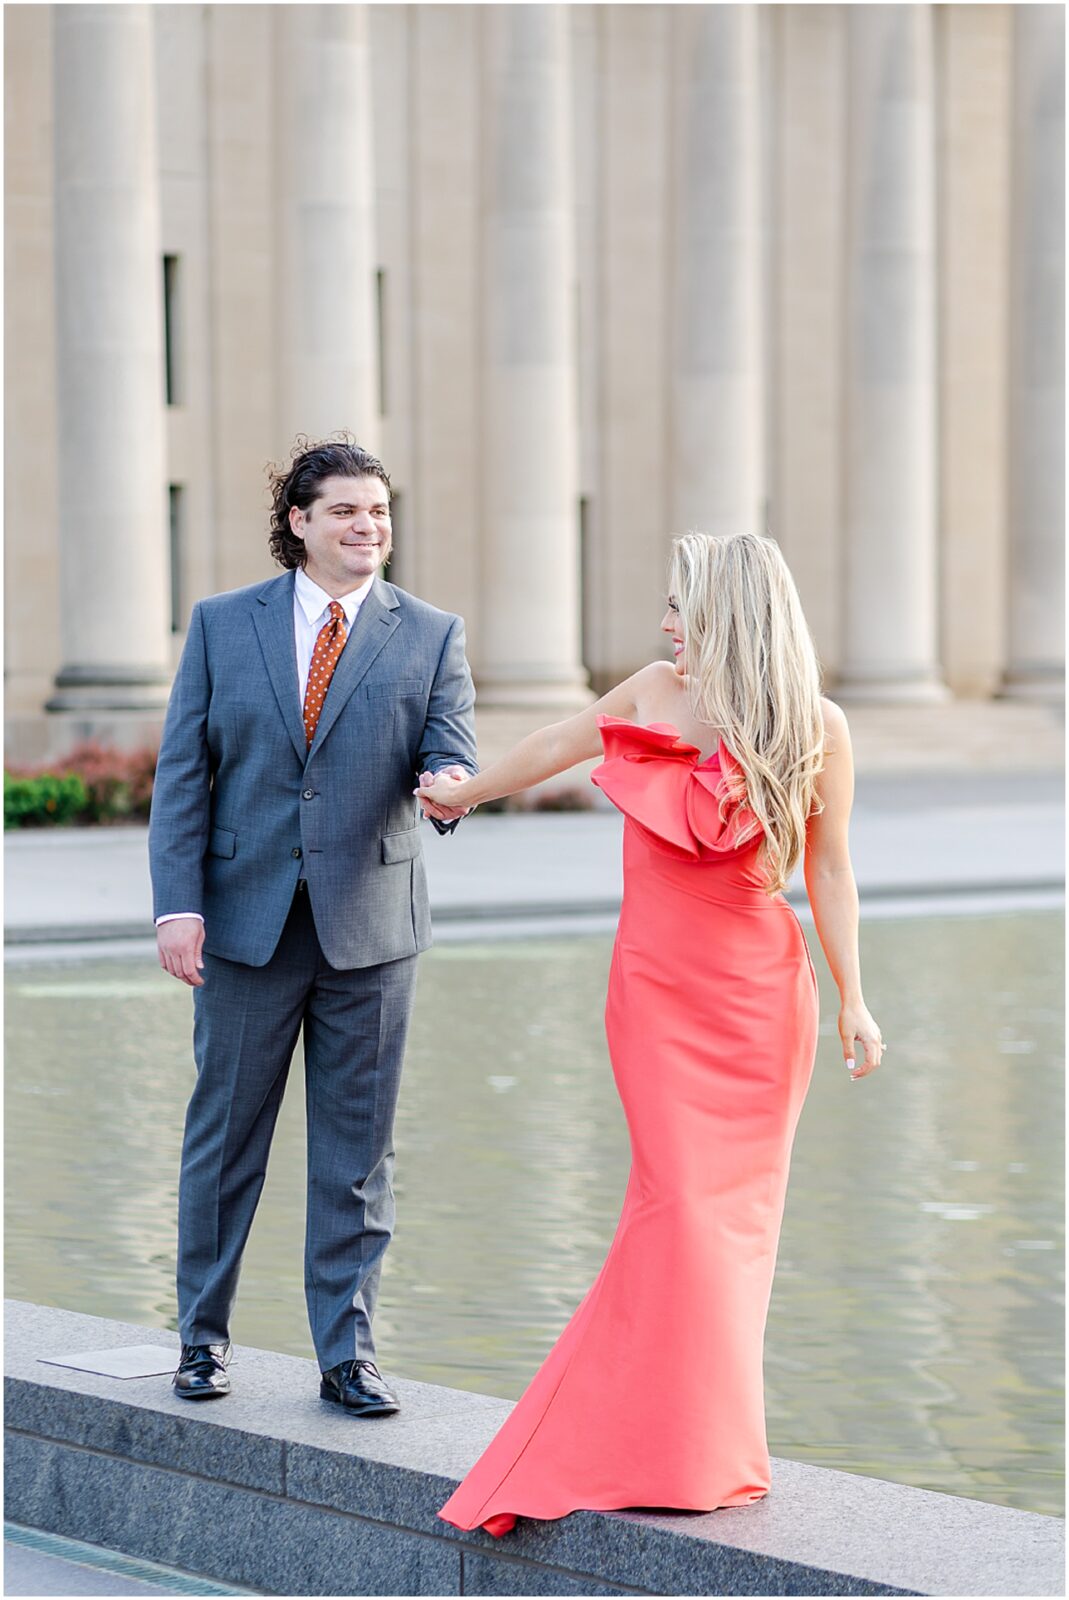 Gorgeous Kansas City engagement photos, the nelson atkins museum of art in kansas city - what to wear to a summer engagement - where to take engagement photos - Kansas City wedding venues - Mariam Saifan Photography - Wedding Photography Education